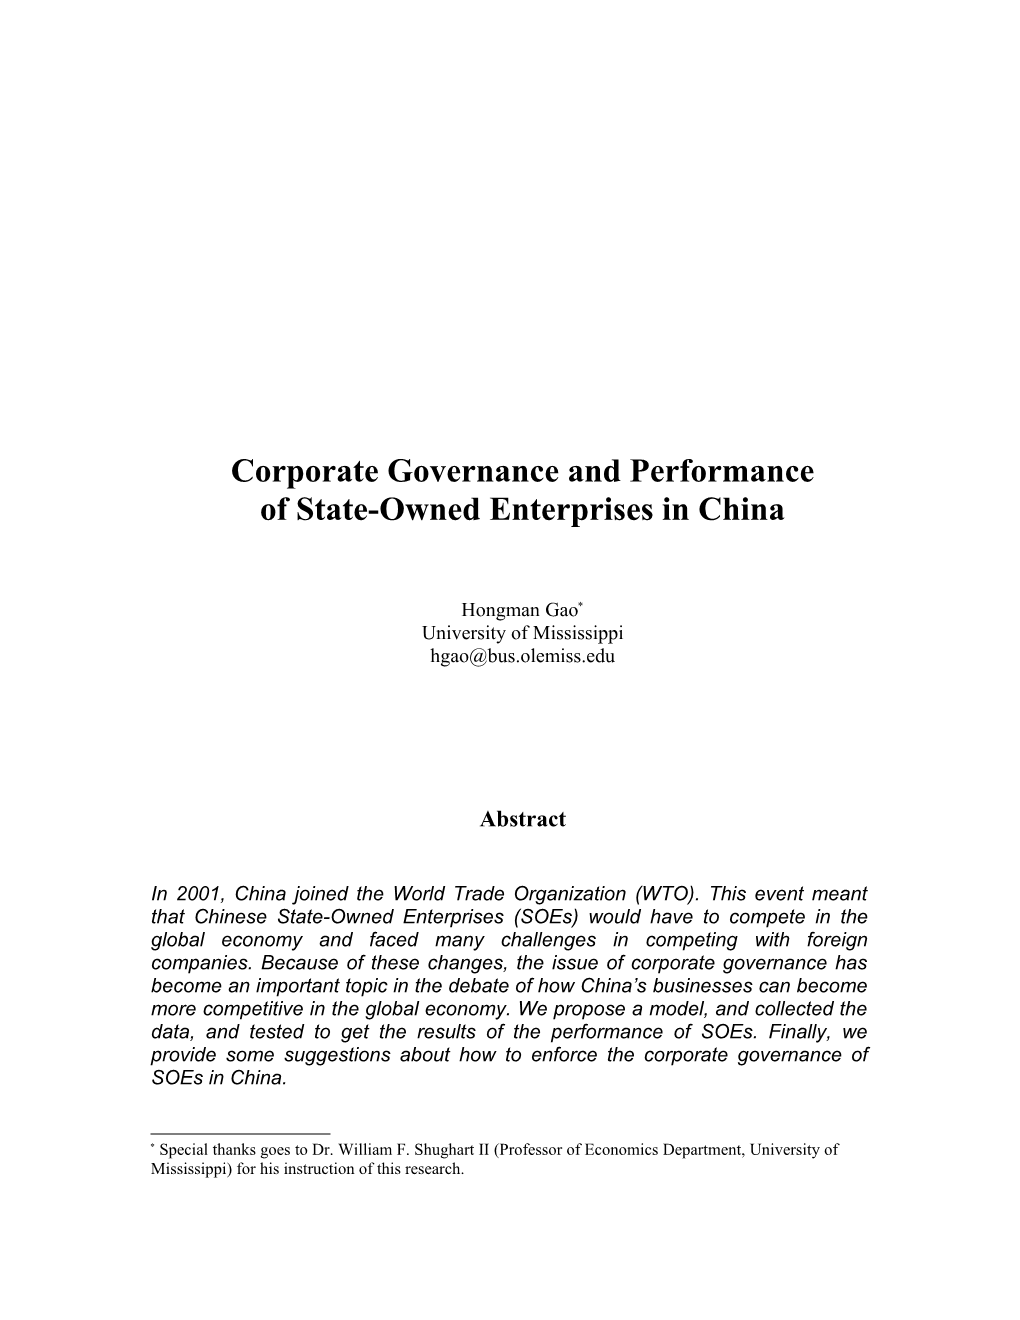 Corporate Governance of State-Owned Enterprises in China